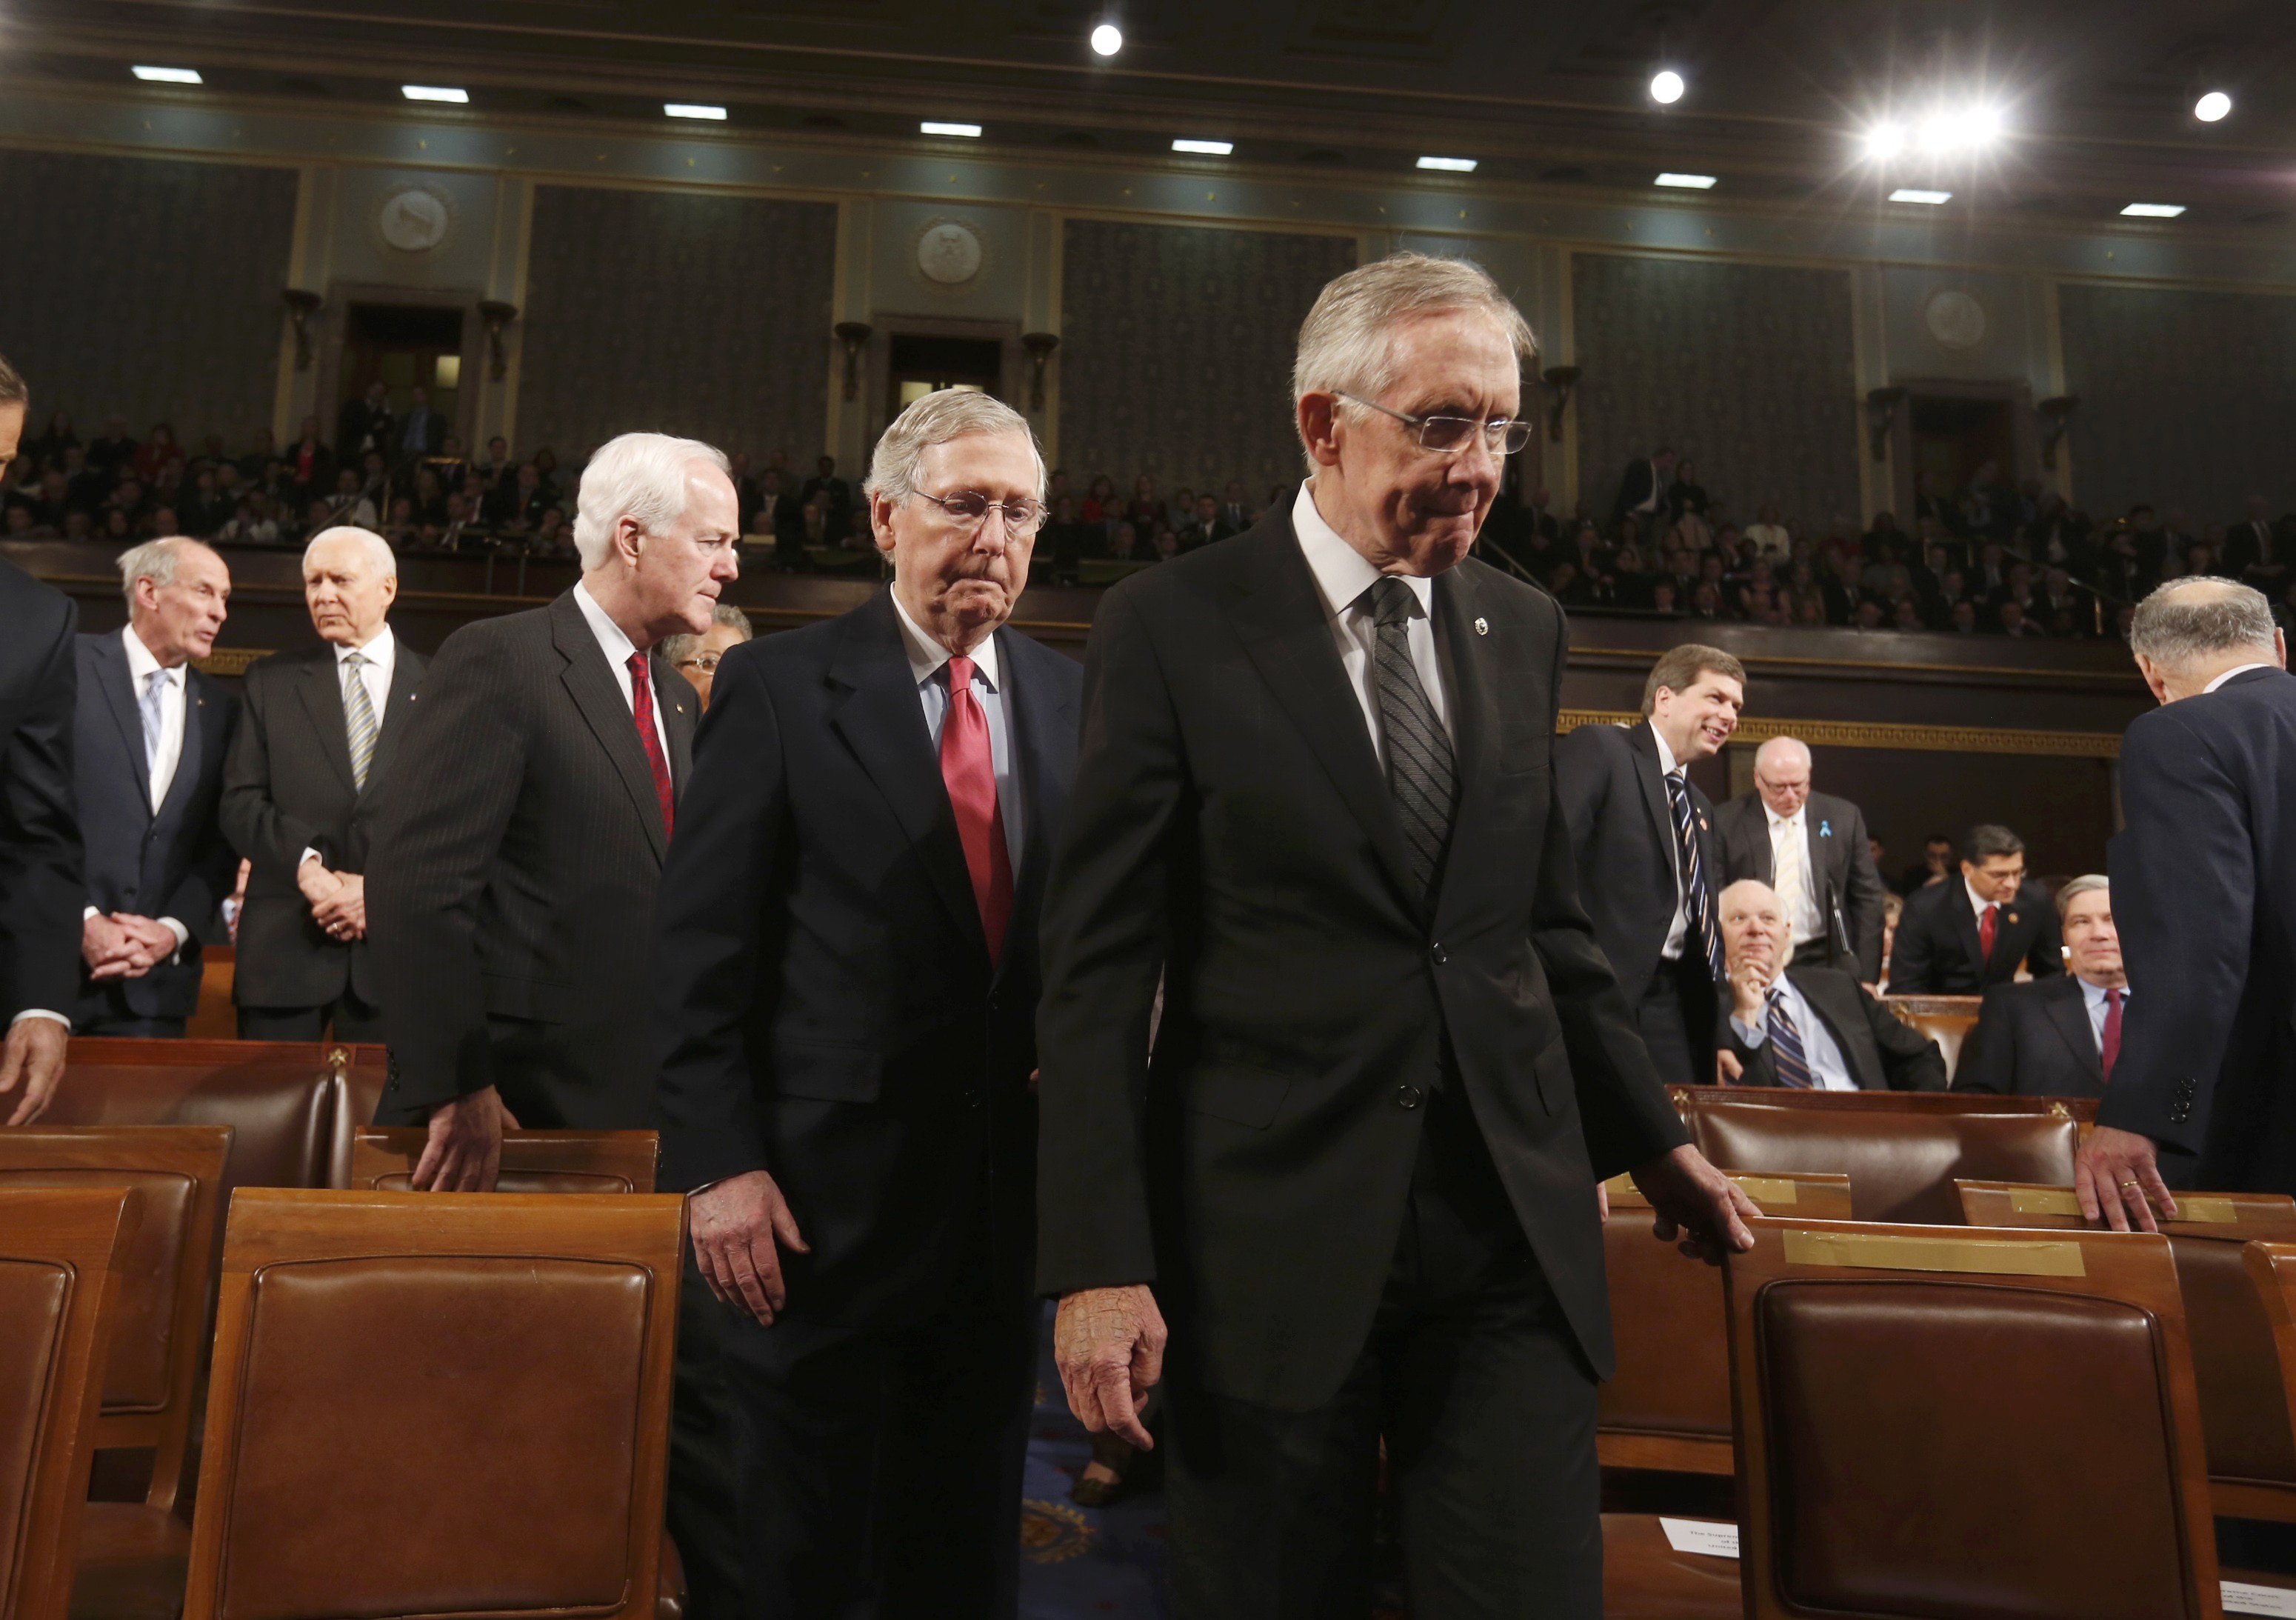 Senate Majority Leader Harry Reid leads Senate Minority Leader Mitch McConnell to the front of the chamber before President Barack Obama delivers his State of the Union speech on Capitol Hill in Washington, January 28, 2014. (Larry Downing—Reuters)